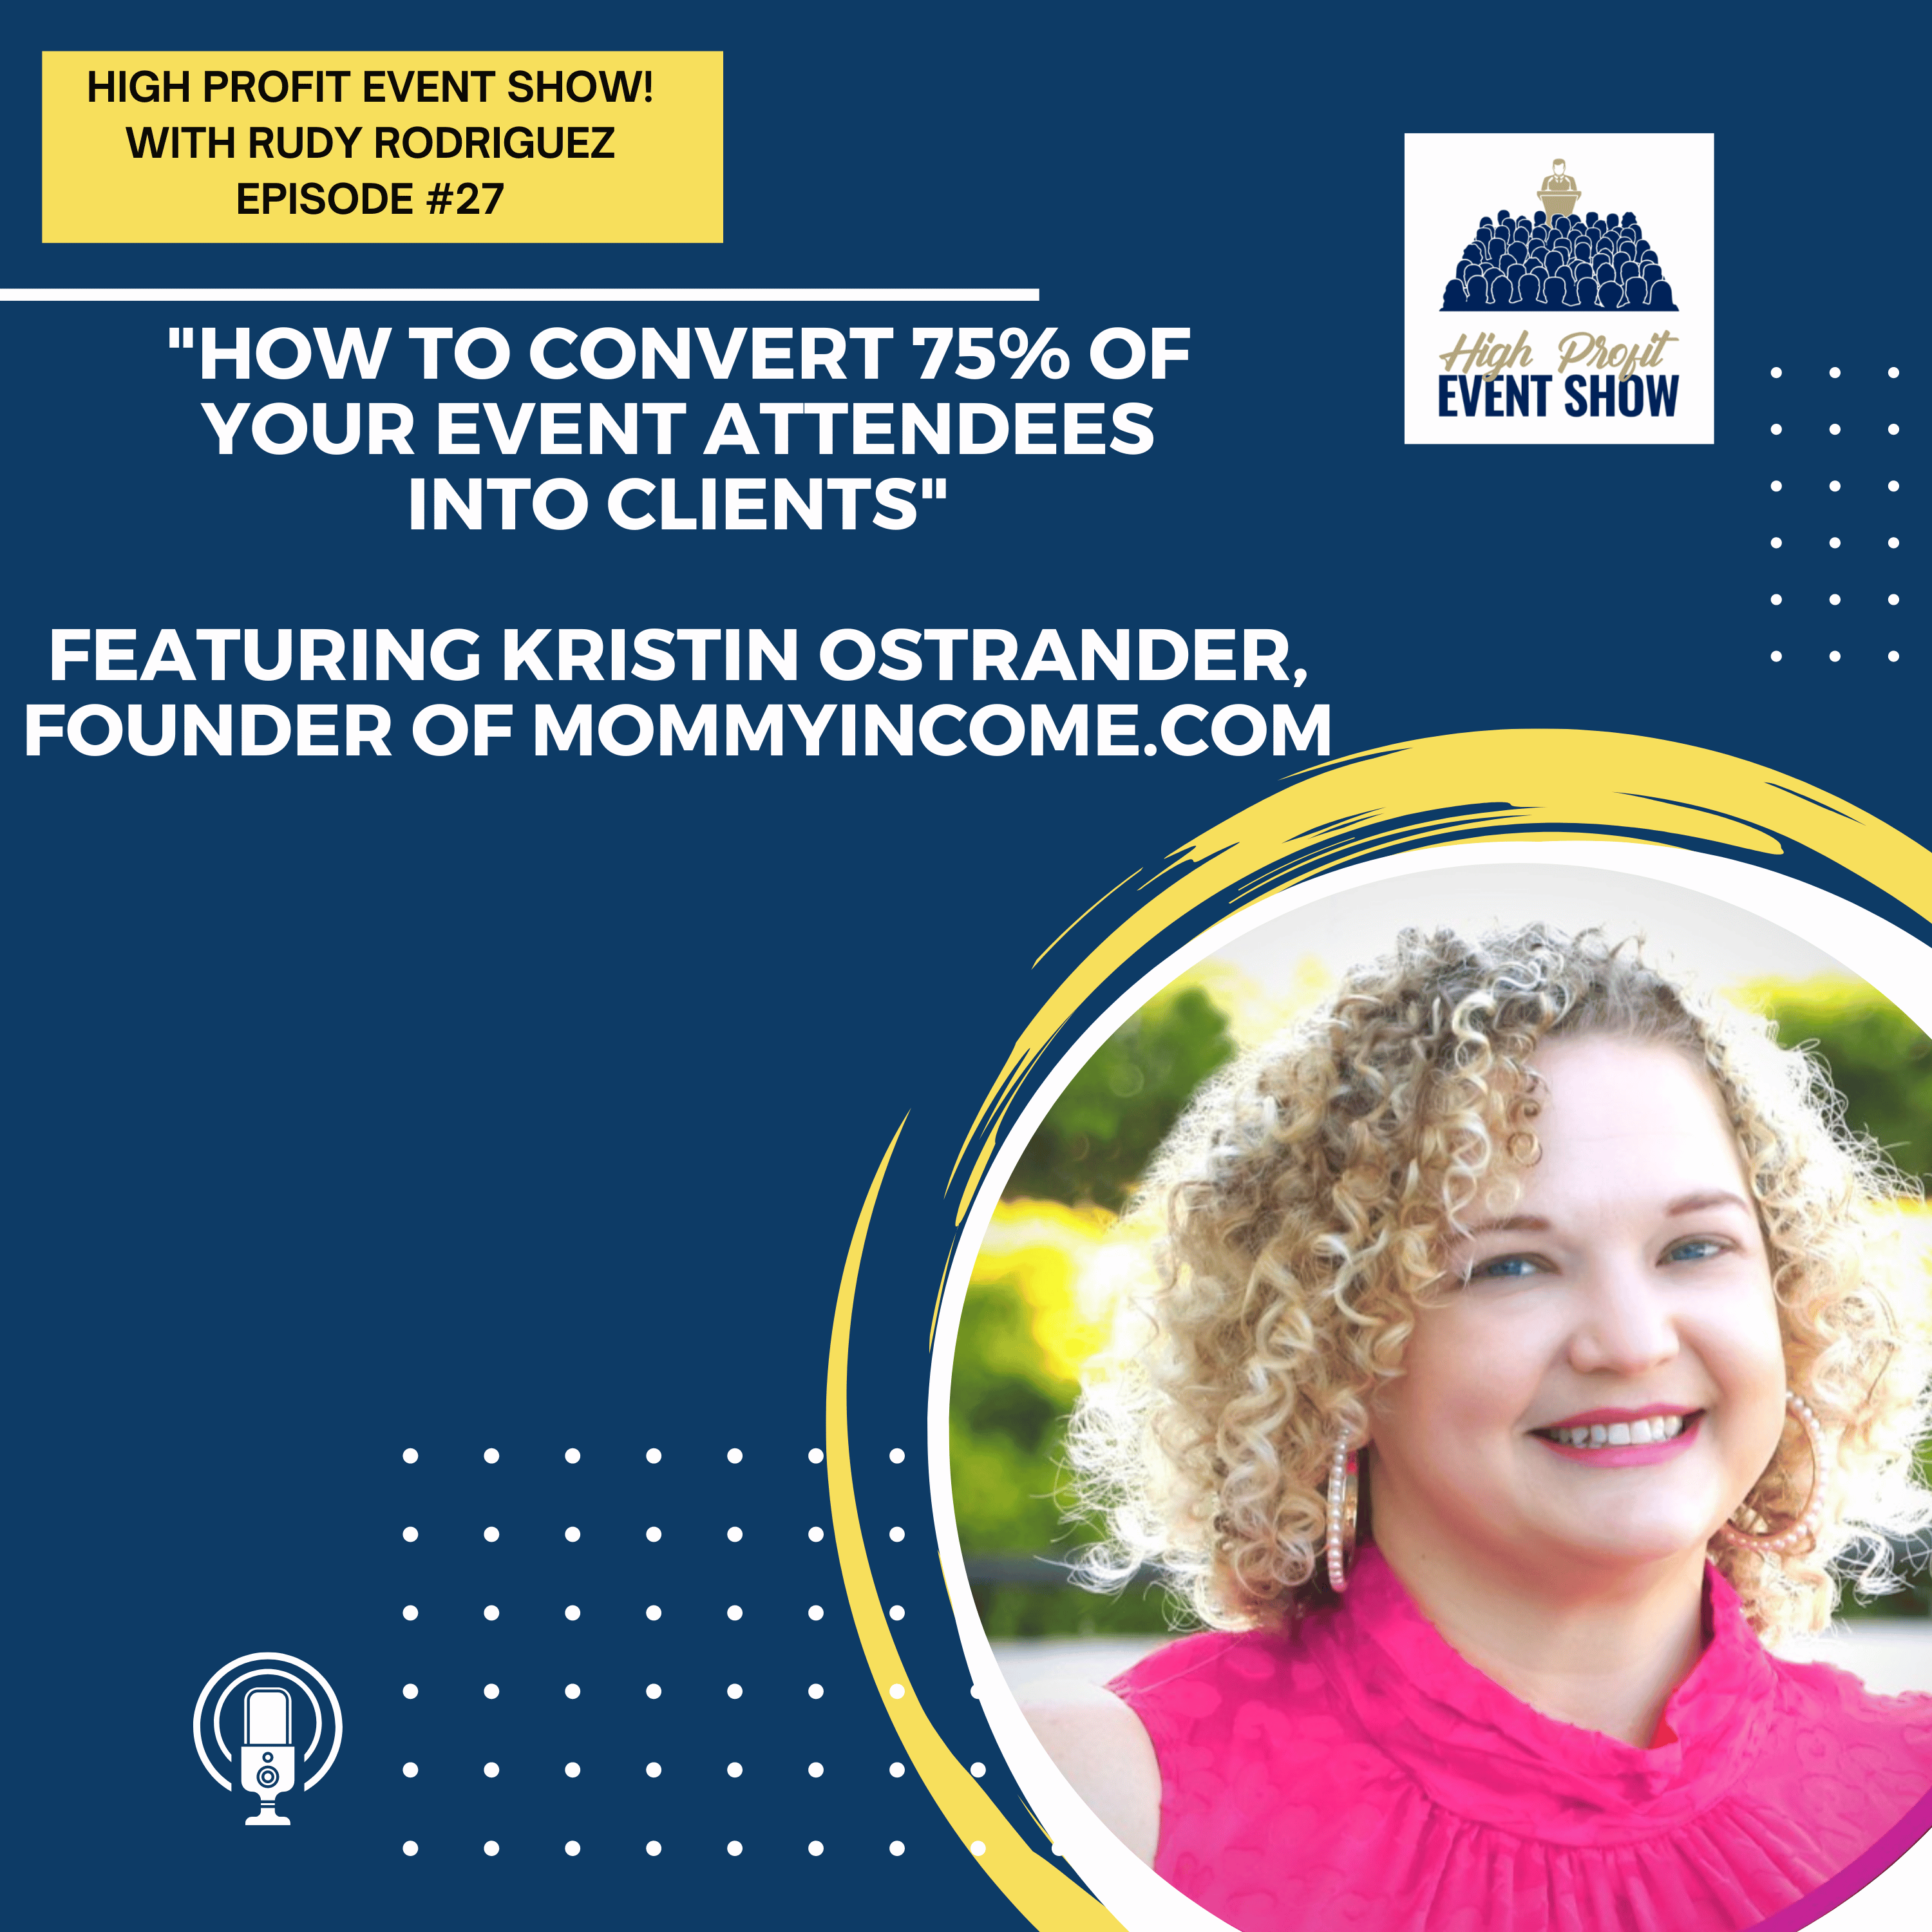 Episode 27: How to Convert 75% of Your Event Attendees Into Clients with Kristin Ostrander!